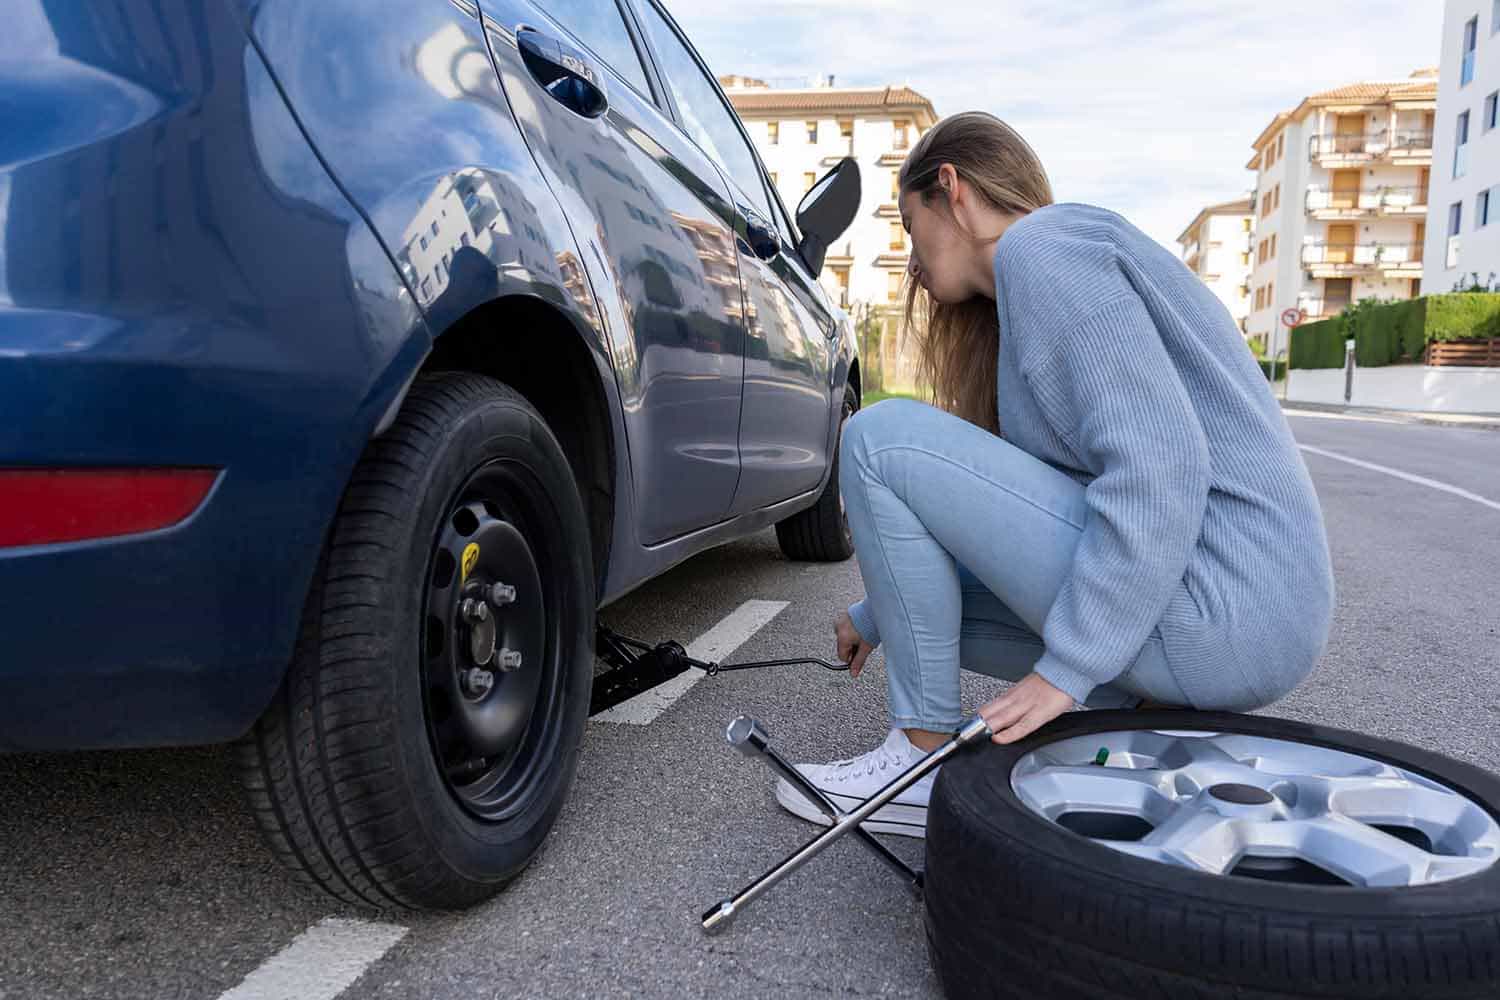 fixing a flat tire - Cash For Cars Houston Texas